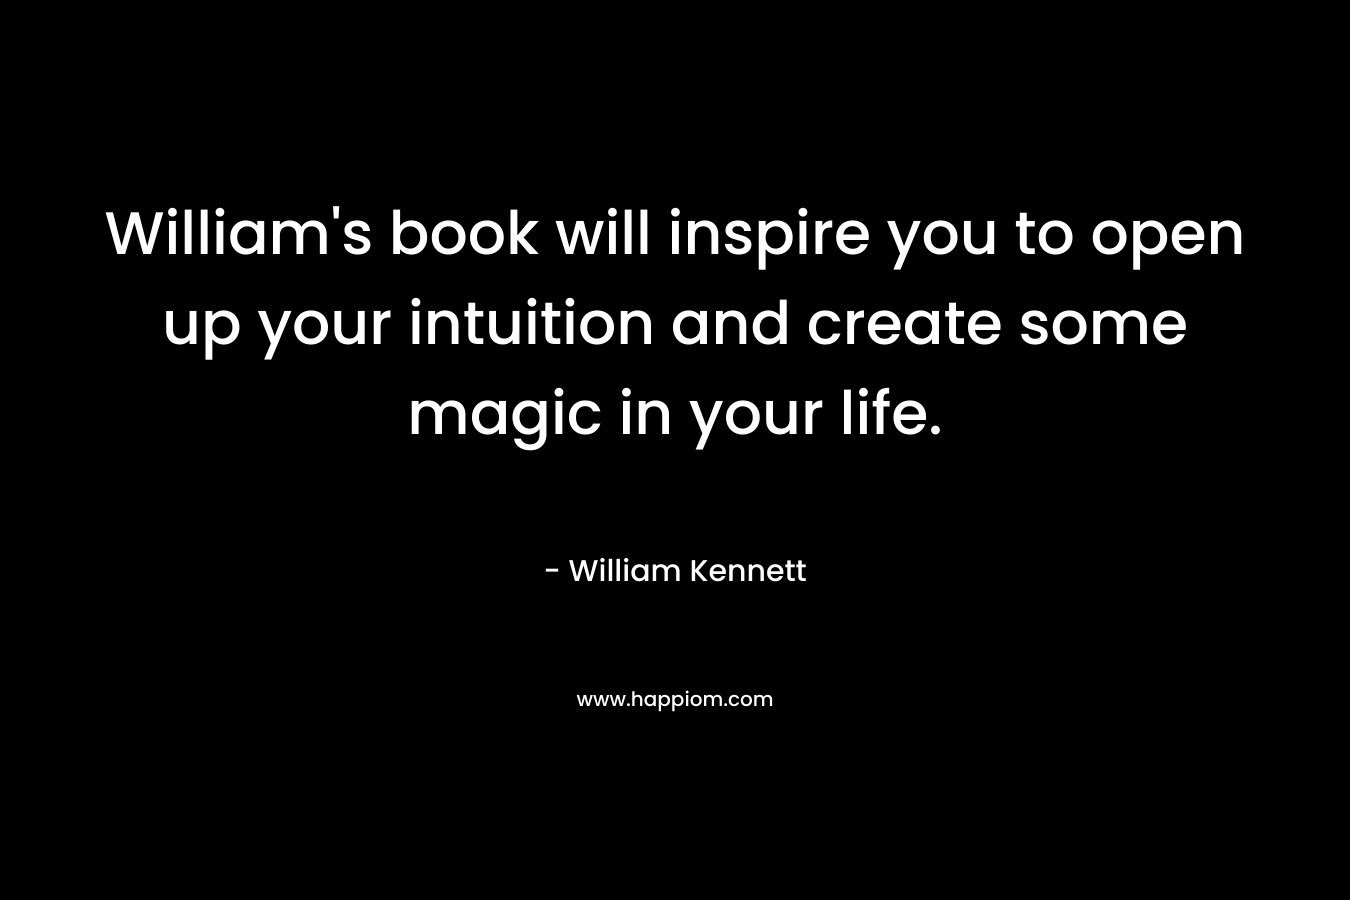 William’s book will inspire you to open up your intuition and create some magic in your life. – William Kennett